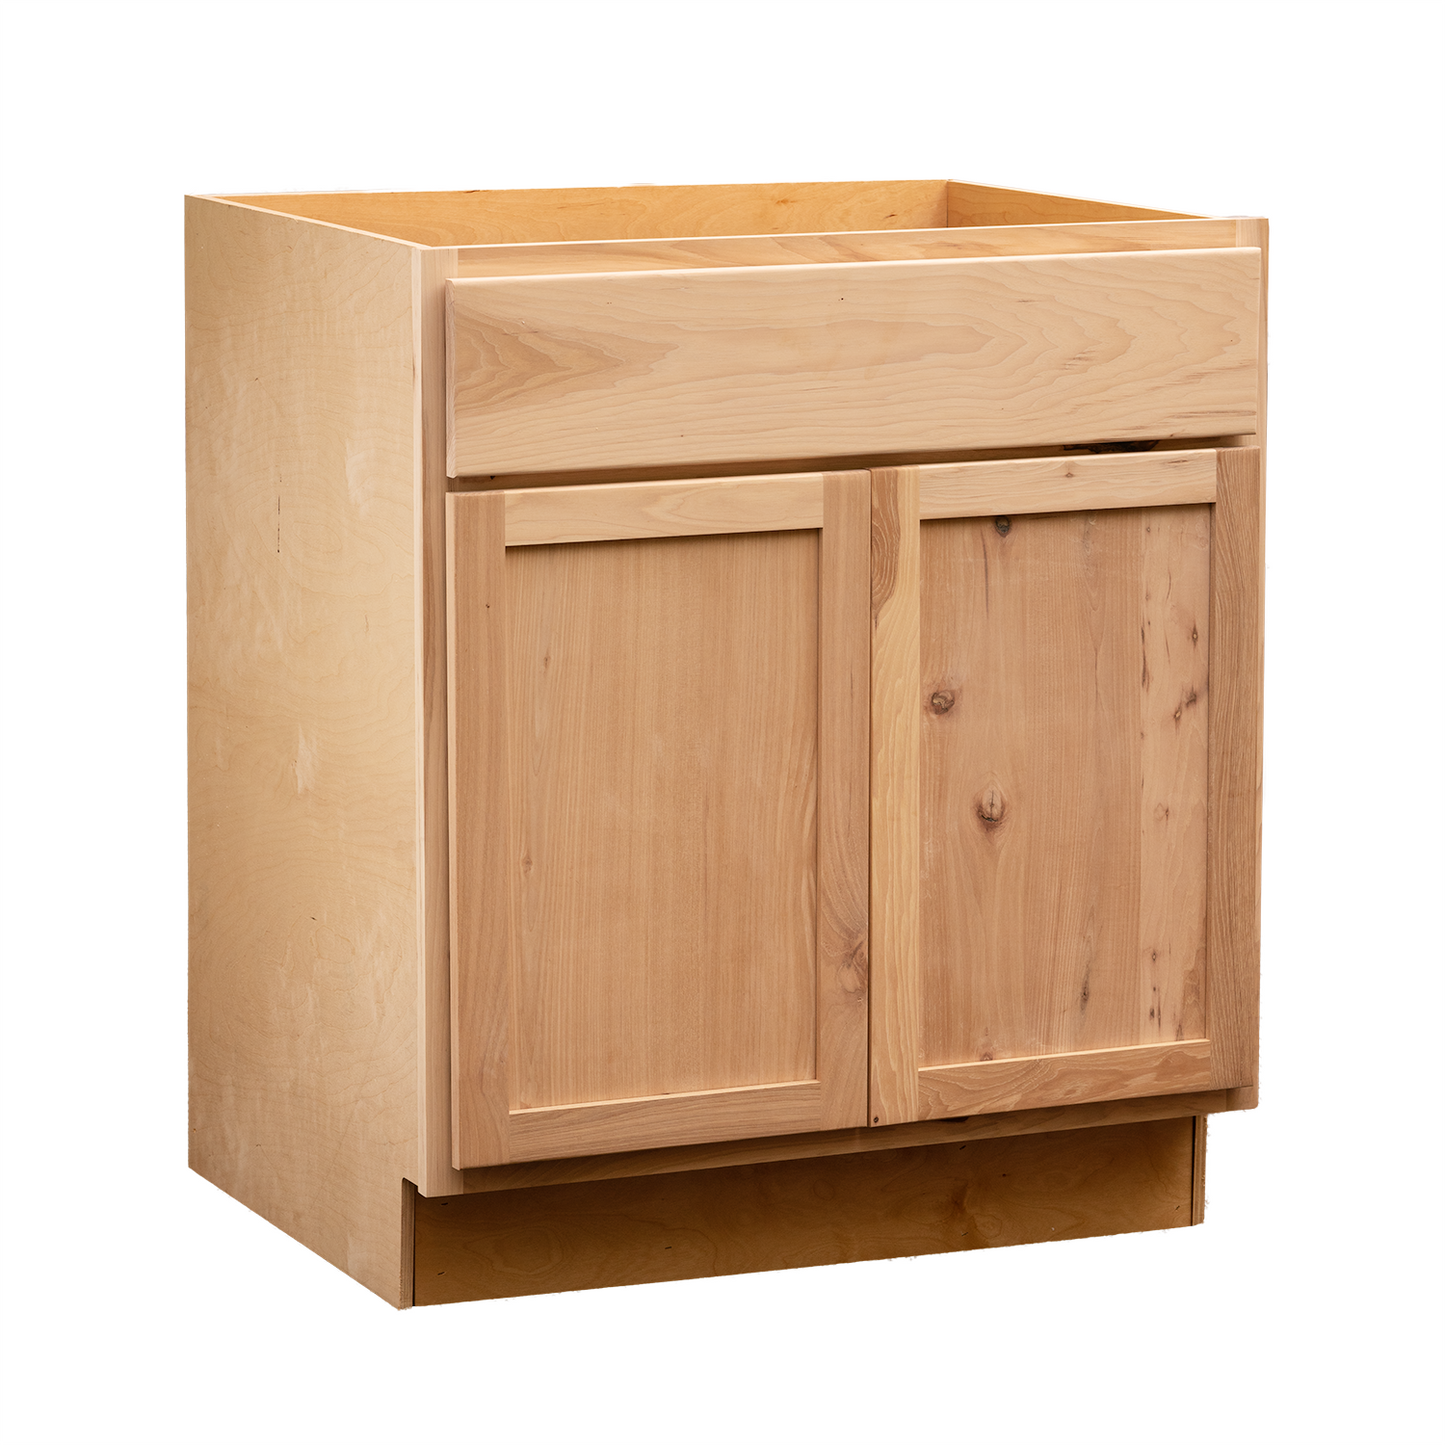 Quicklock RTA (Ready-to-Assemble) Raw Hickory Sink Base Cabinet- 36"W